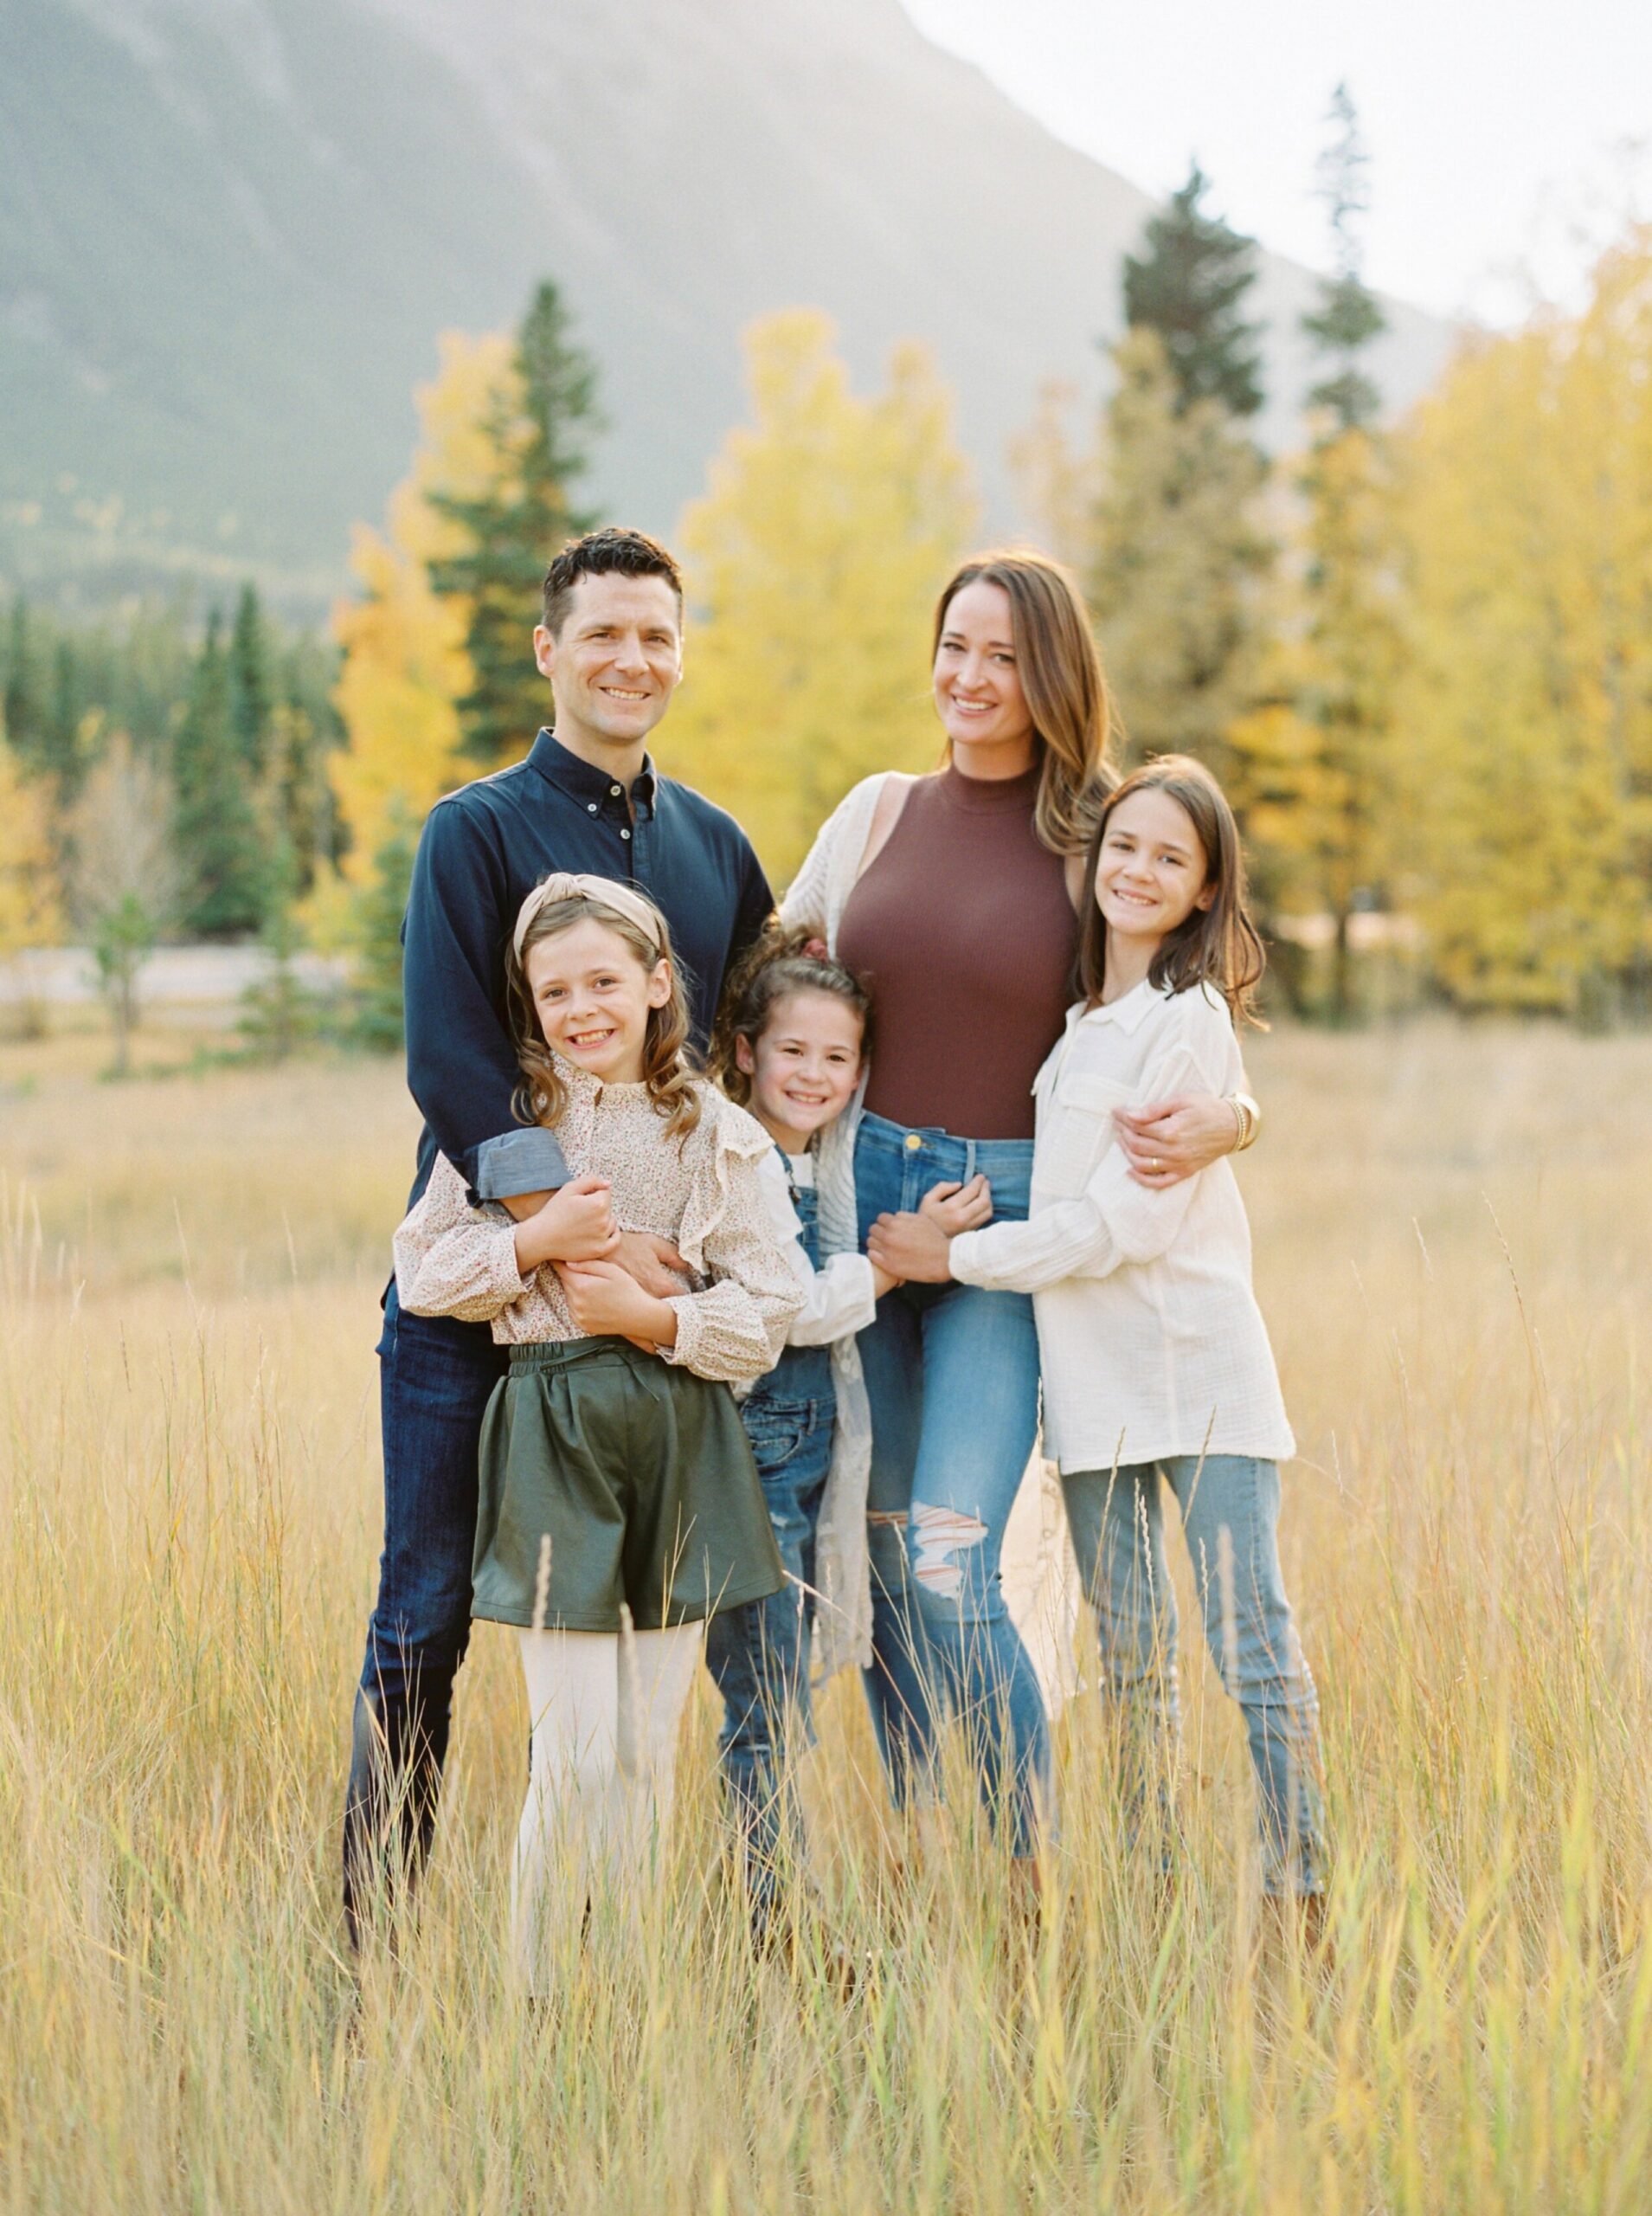  outfit inspiration for fall famliy portraits | Calgary fall family photographers | family photo session ideas and poses with older kids | film photographer Justine Milton 